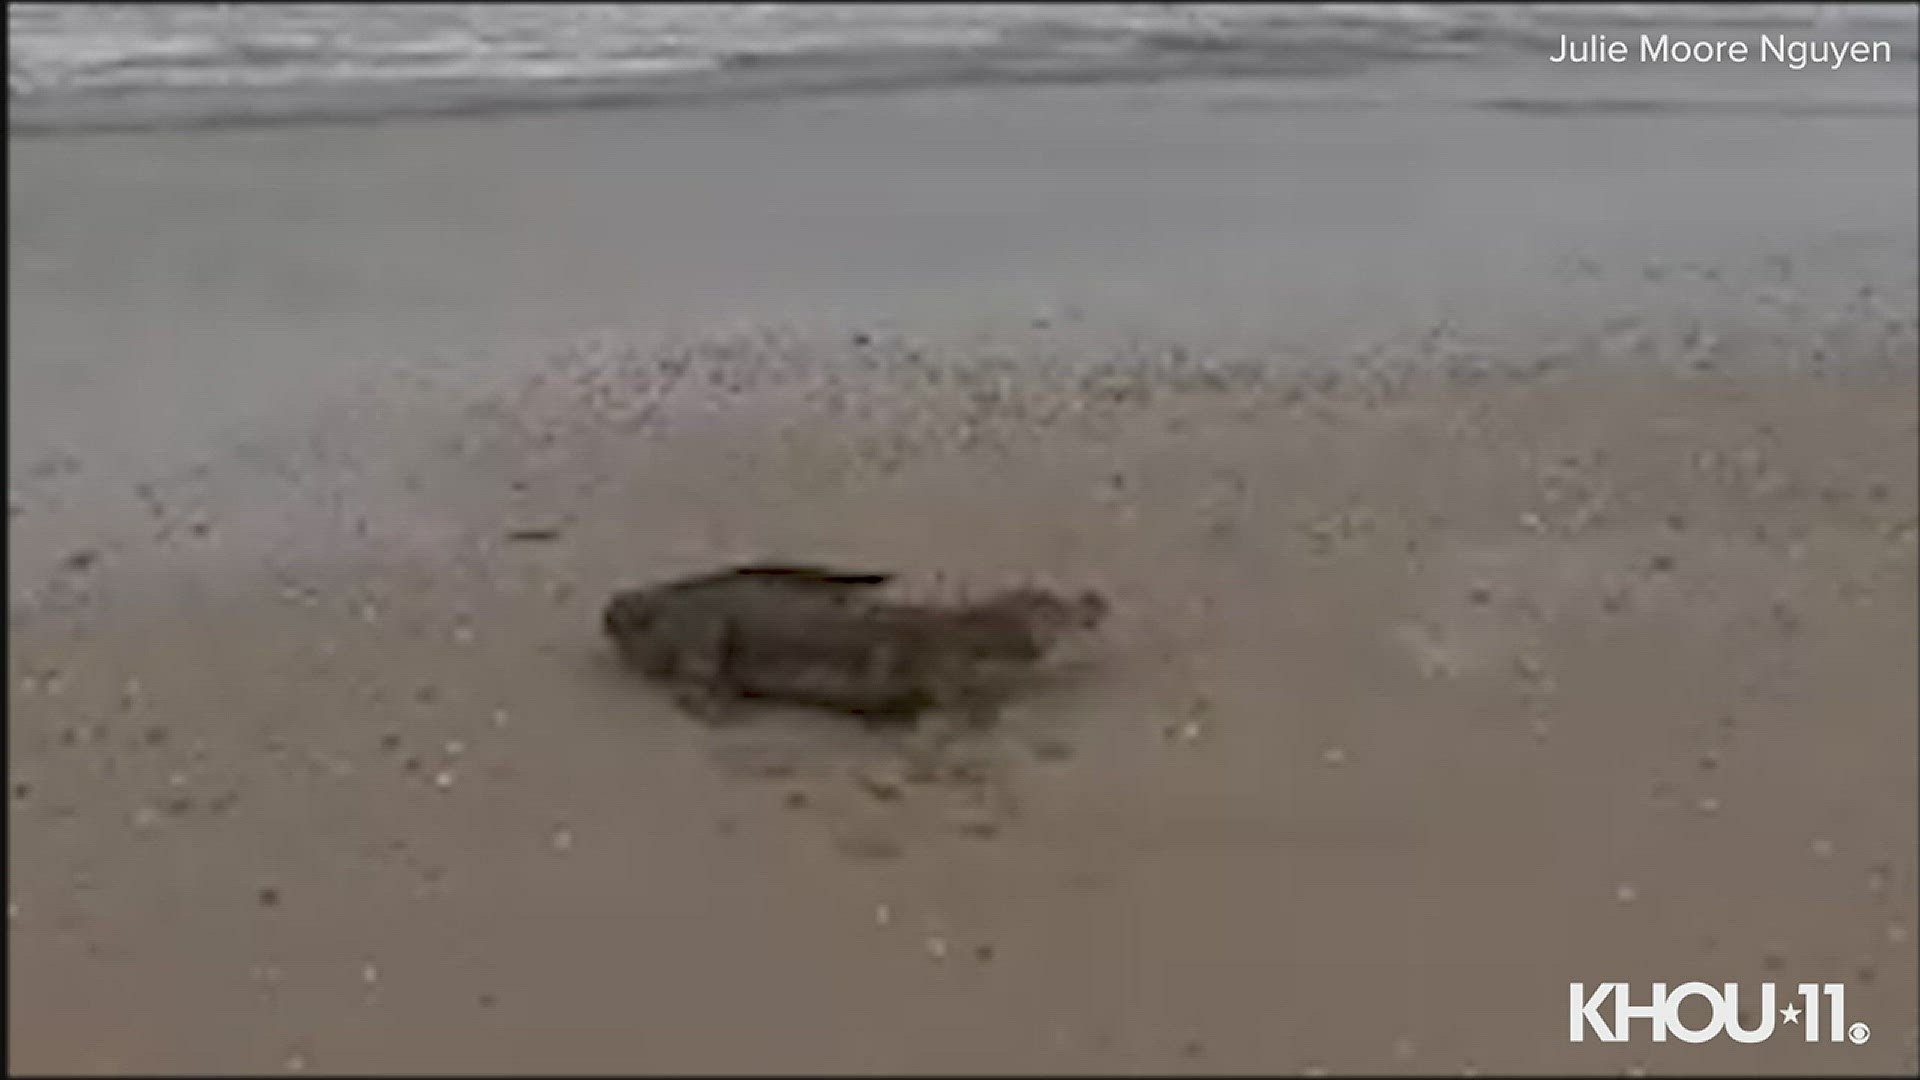 Julie Moore Nguyen shared this video of the gator she spotted on the Bolivar Peninsula beach. Experts say it's unusual to see gators in salt water but it can happen.